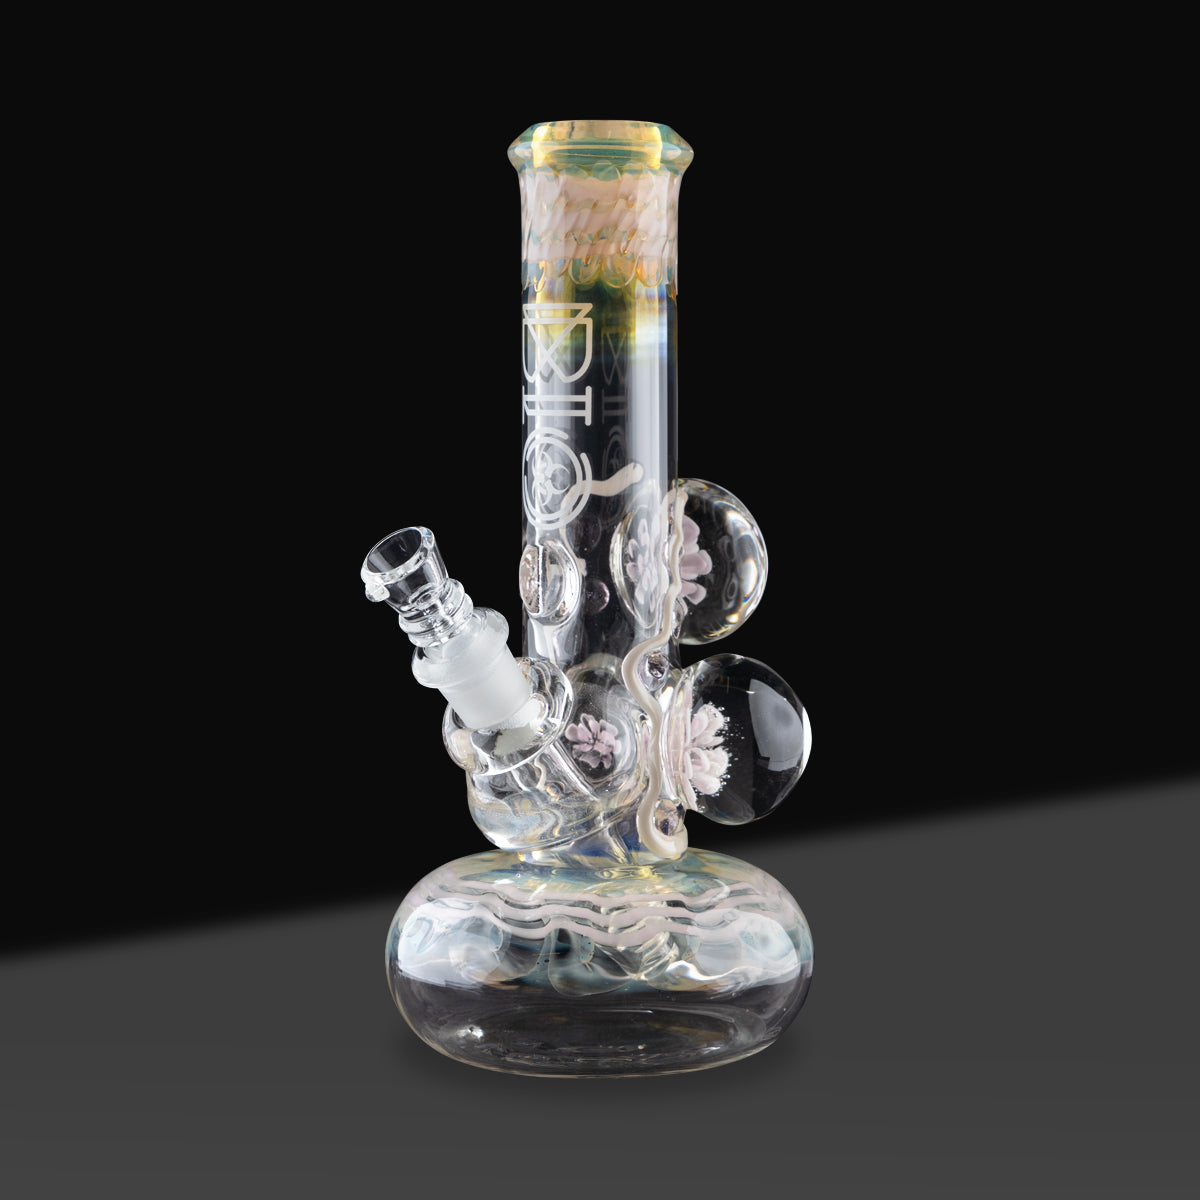 BIO Glass | Worked Illuminati Three Flower Marble Bubble Water Pipe | 9" - 14mm - Various Colors